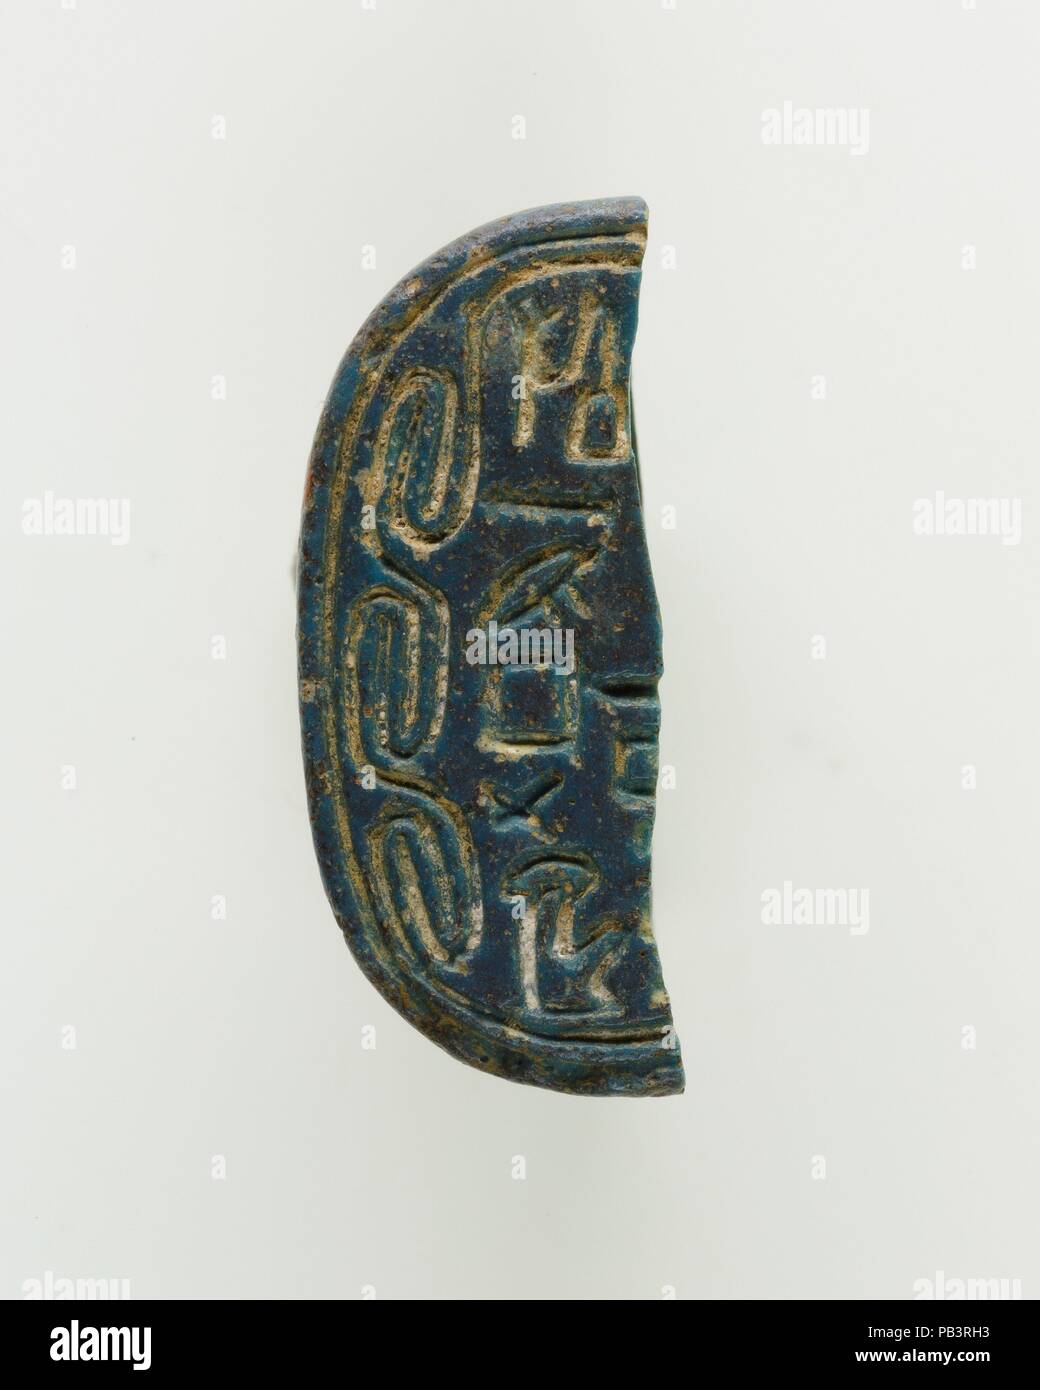 Scarab of an Official. Dimensions: L. 2.1 cm (13/16 in). Dynasty: Dynasty 12-18. Date: ca. 1981-1550 B.C.. Museum: Metropolitan Museum of Art, New York, USA. Stock Photo